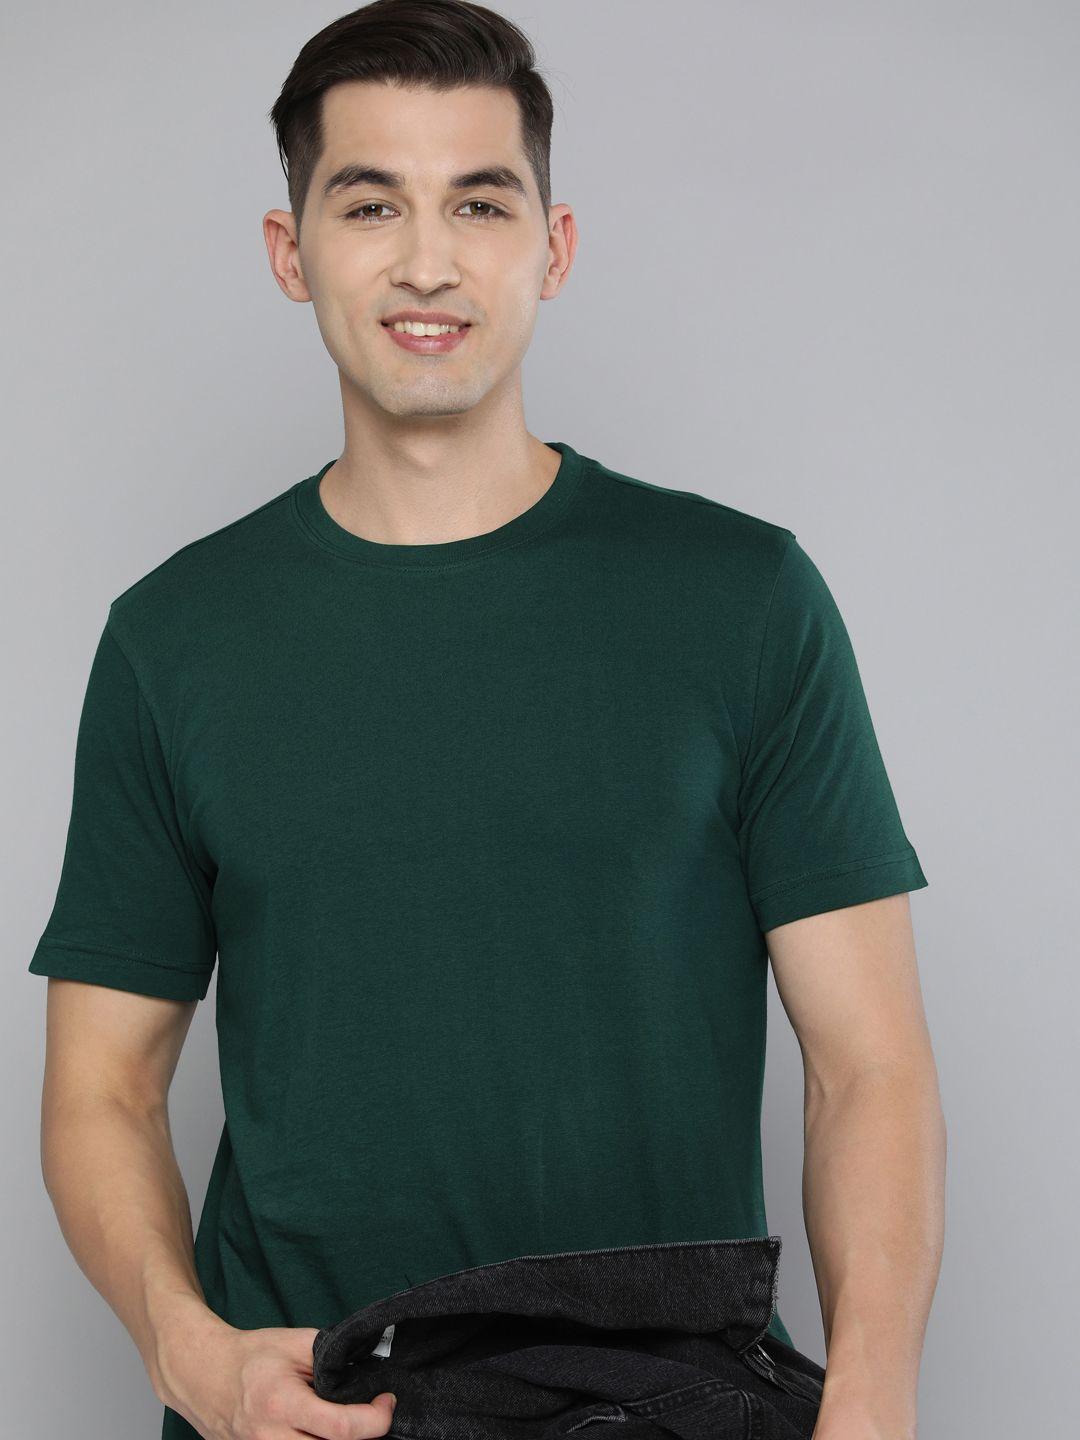 here&now men solid pure cotton t-shirt